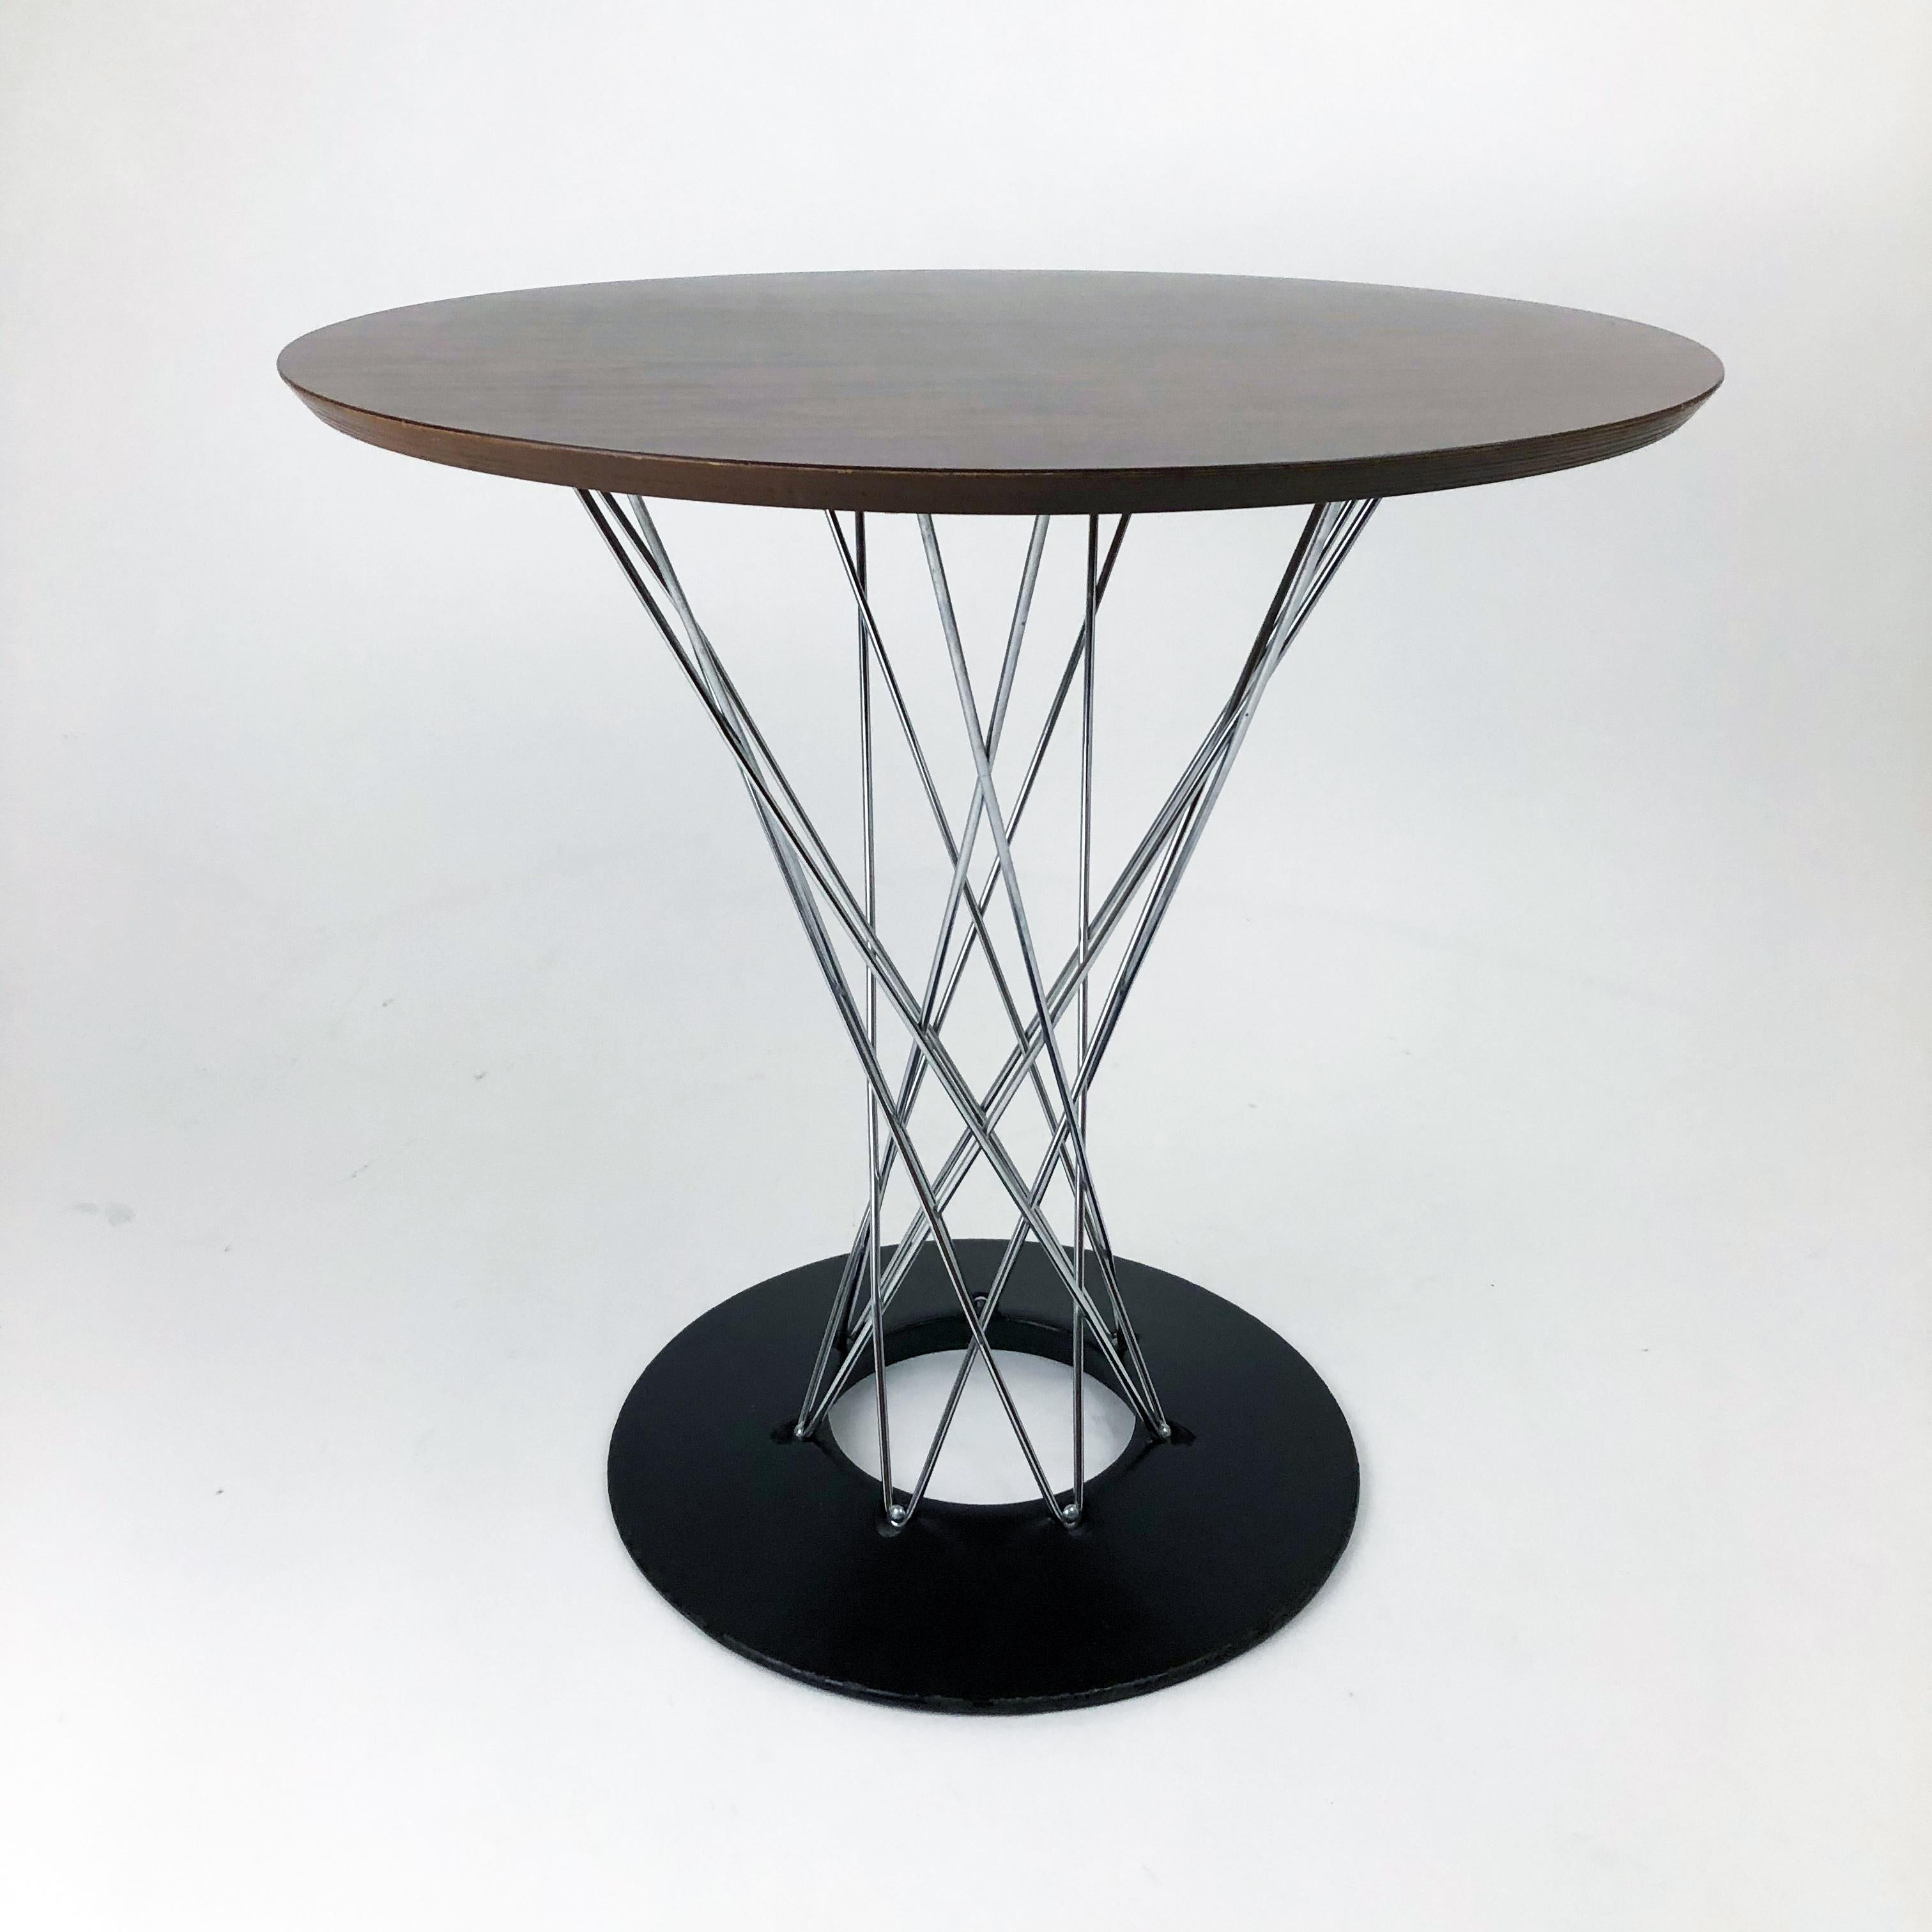 American Cyclone Dining Table by Isamu Noguchi for Knoll